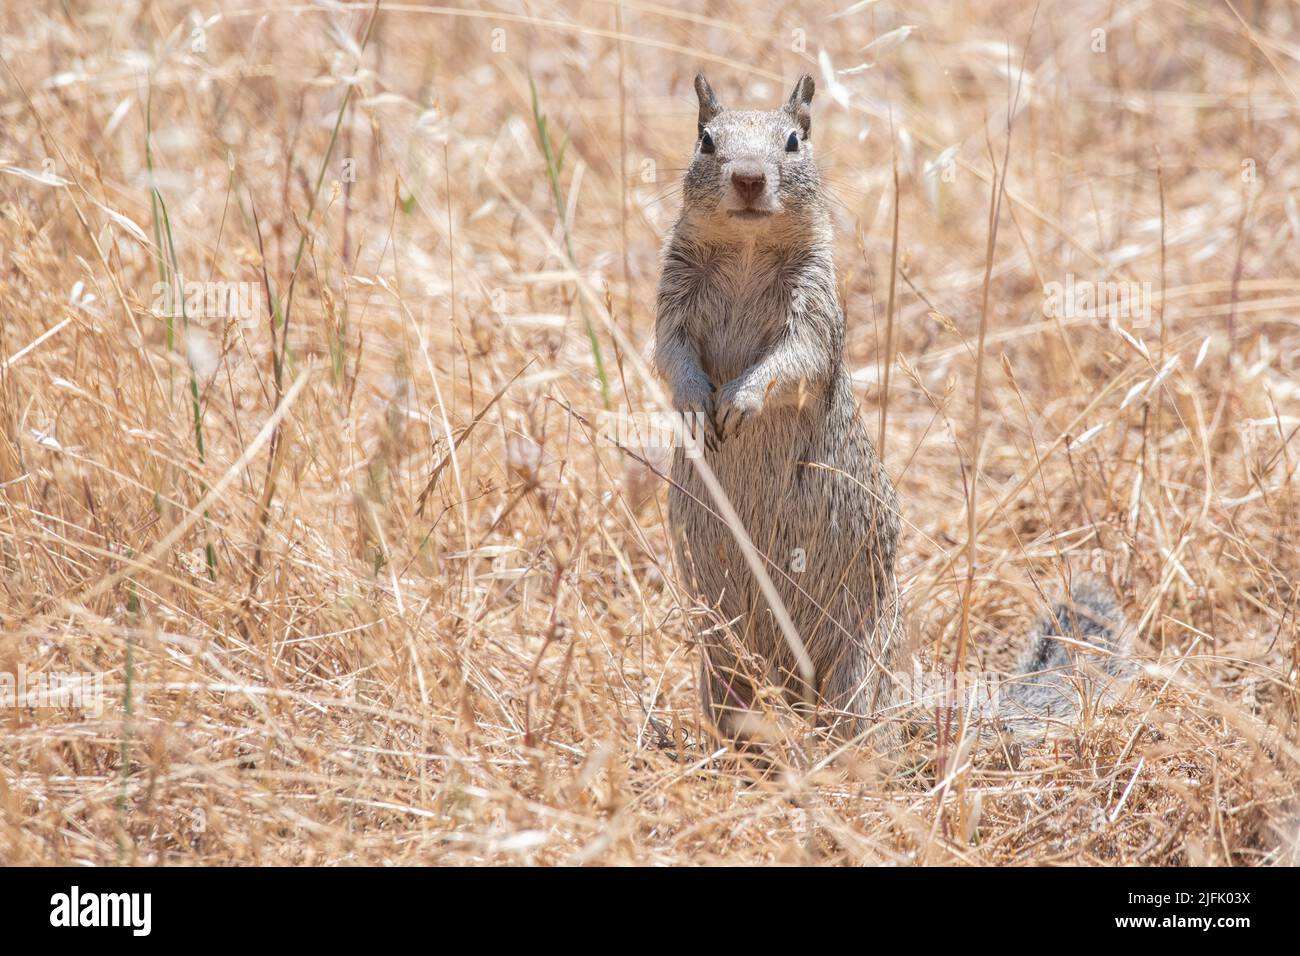 California ground squirrel (Otospermophilus beecheyi) in the grass standing at alert and looking at the camera. Stock Photo